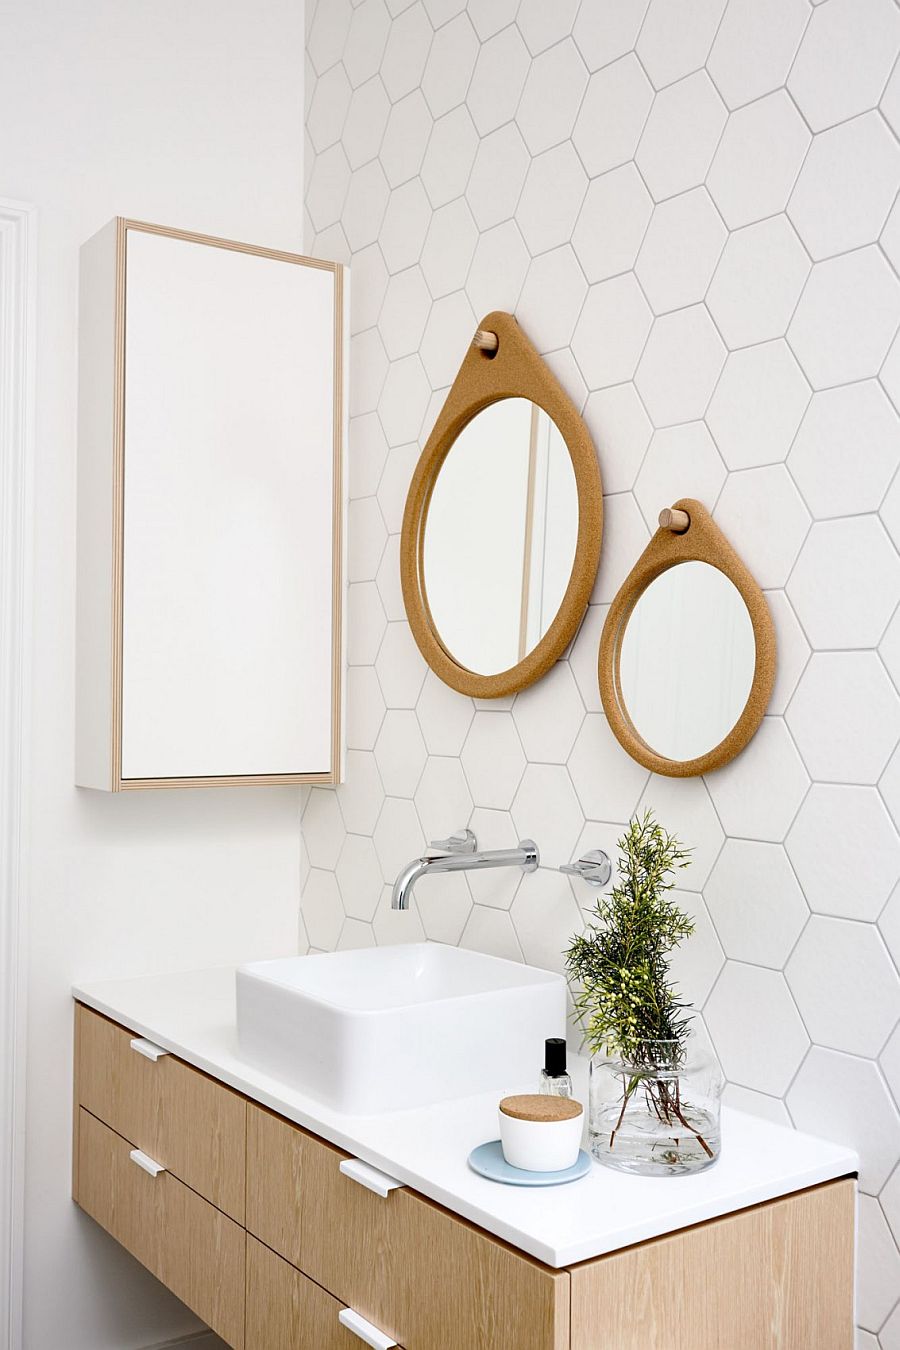 Mirror frames and vanity bring elegance to the white bathroom